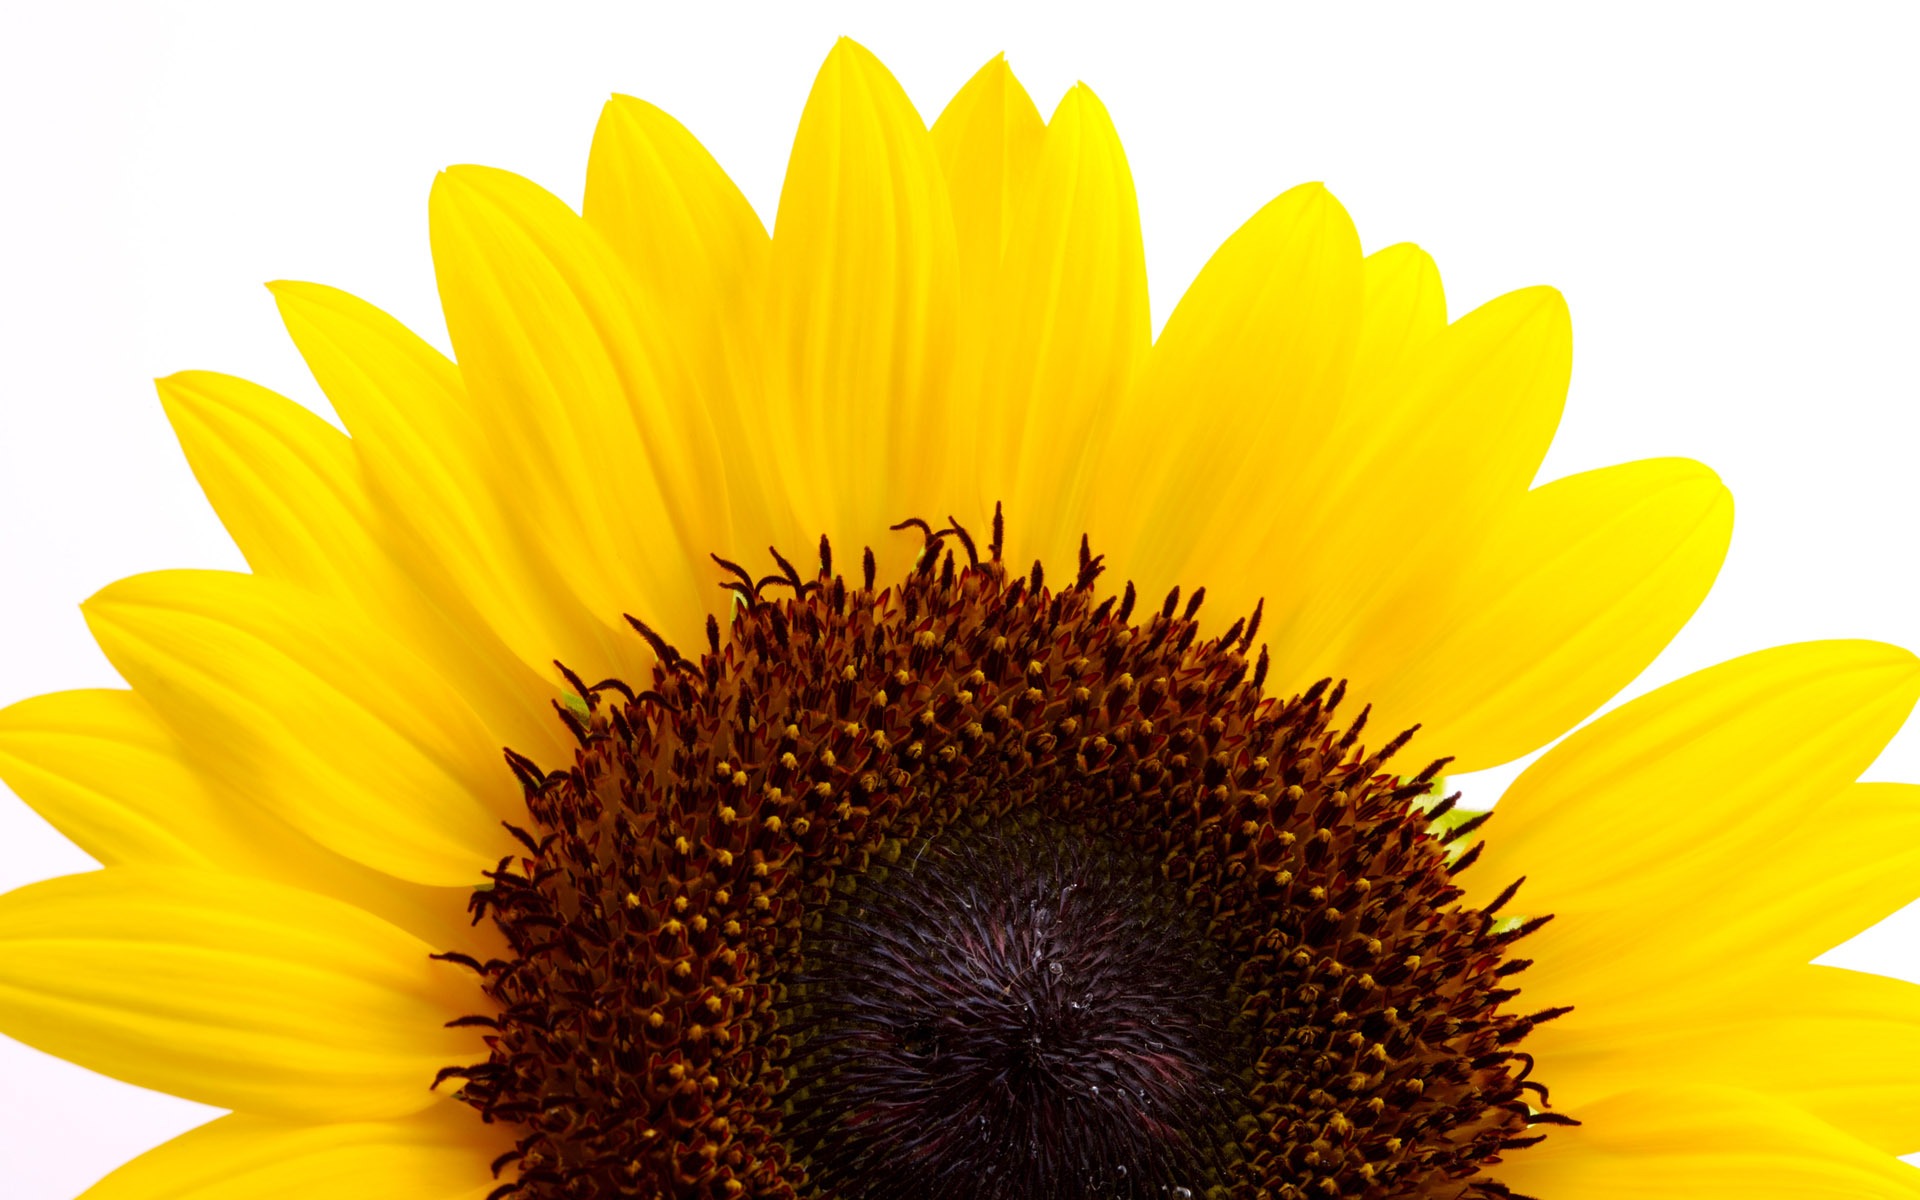 Sunny sunflower photo HD Wallpapers #18 - 1920x1200